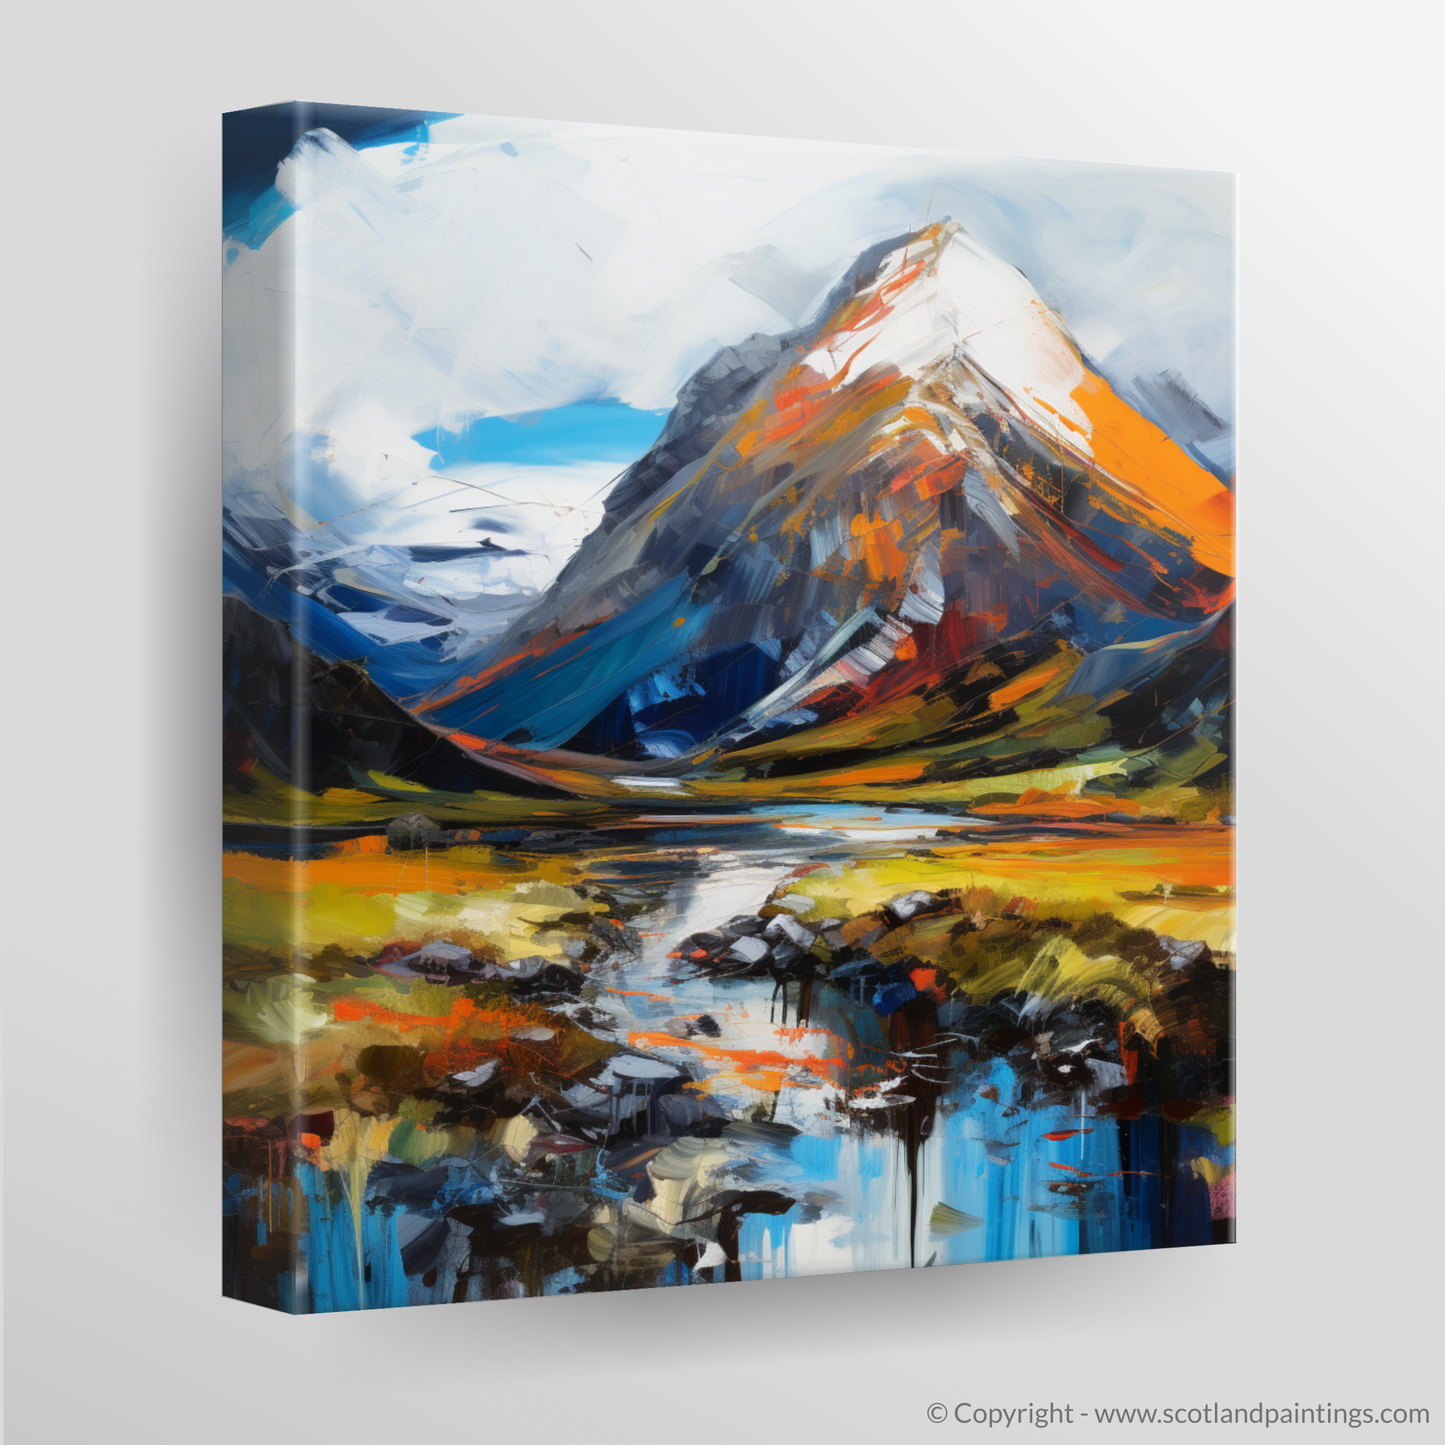 Painting and Art Print of Ben Nevis. Majestic Ben Nevis: An Expressionist Homage to Scotland's Highest Peak.